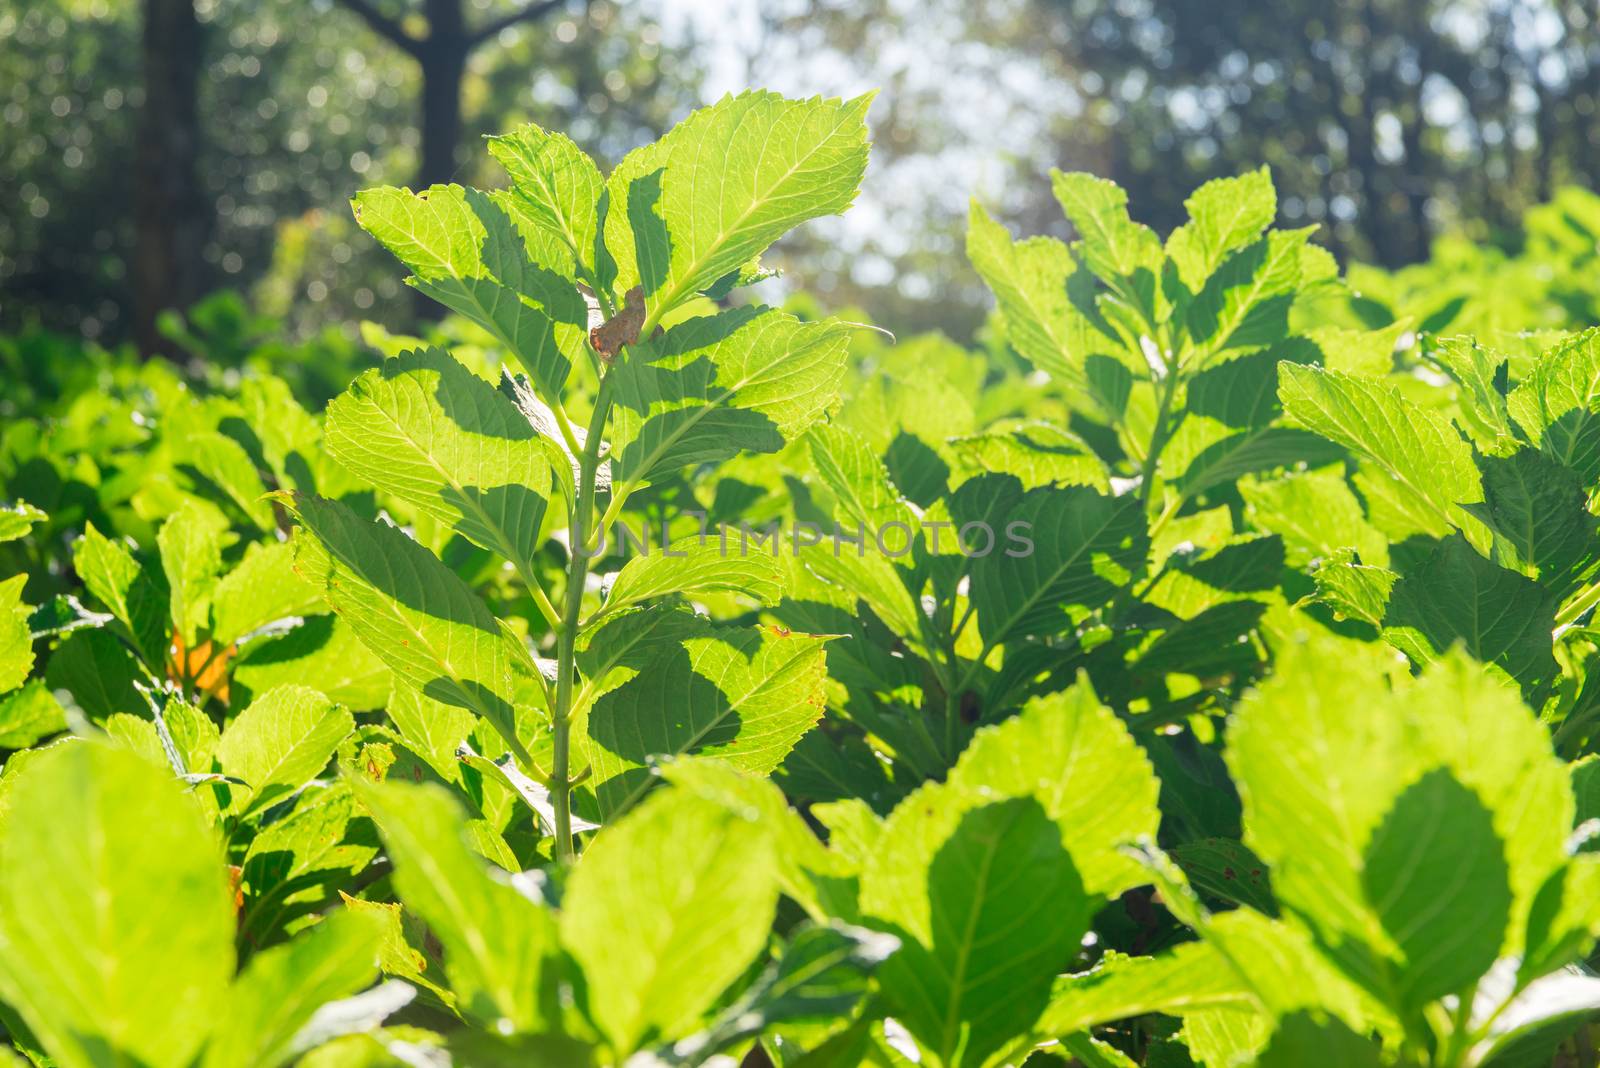 grean tea leaf photosynthesize in a sunny day among garden